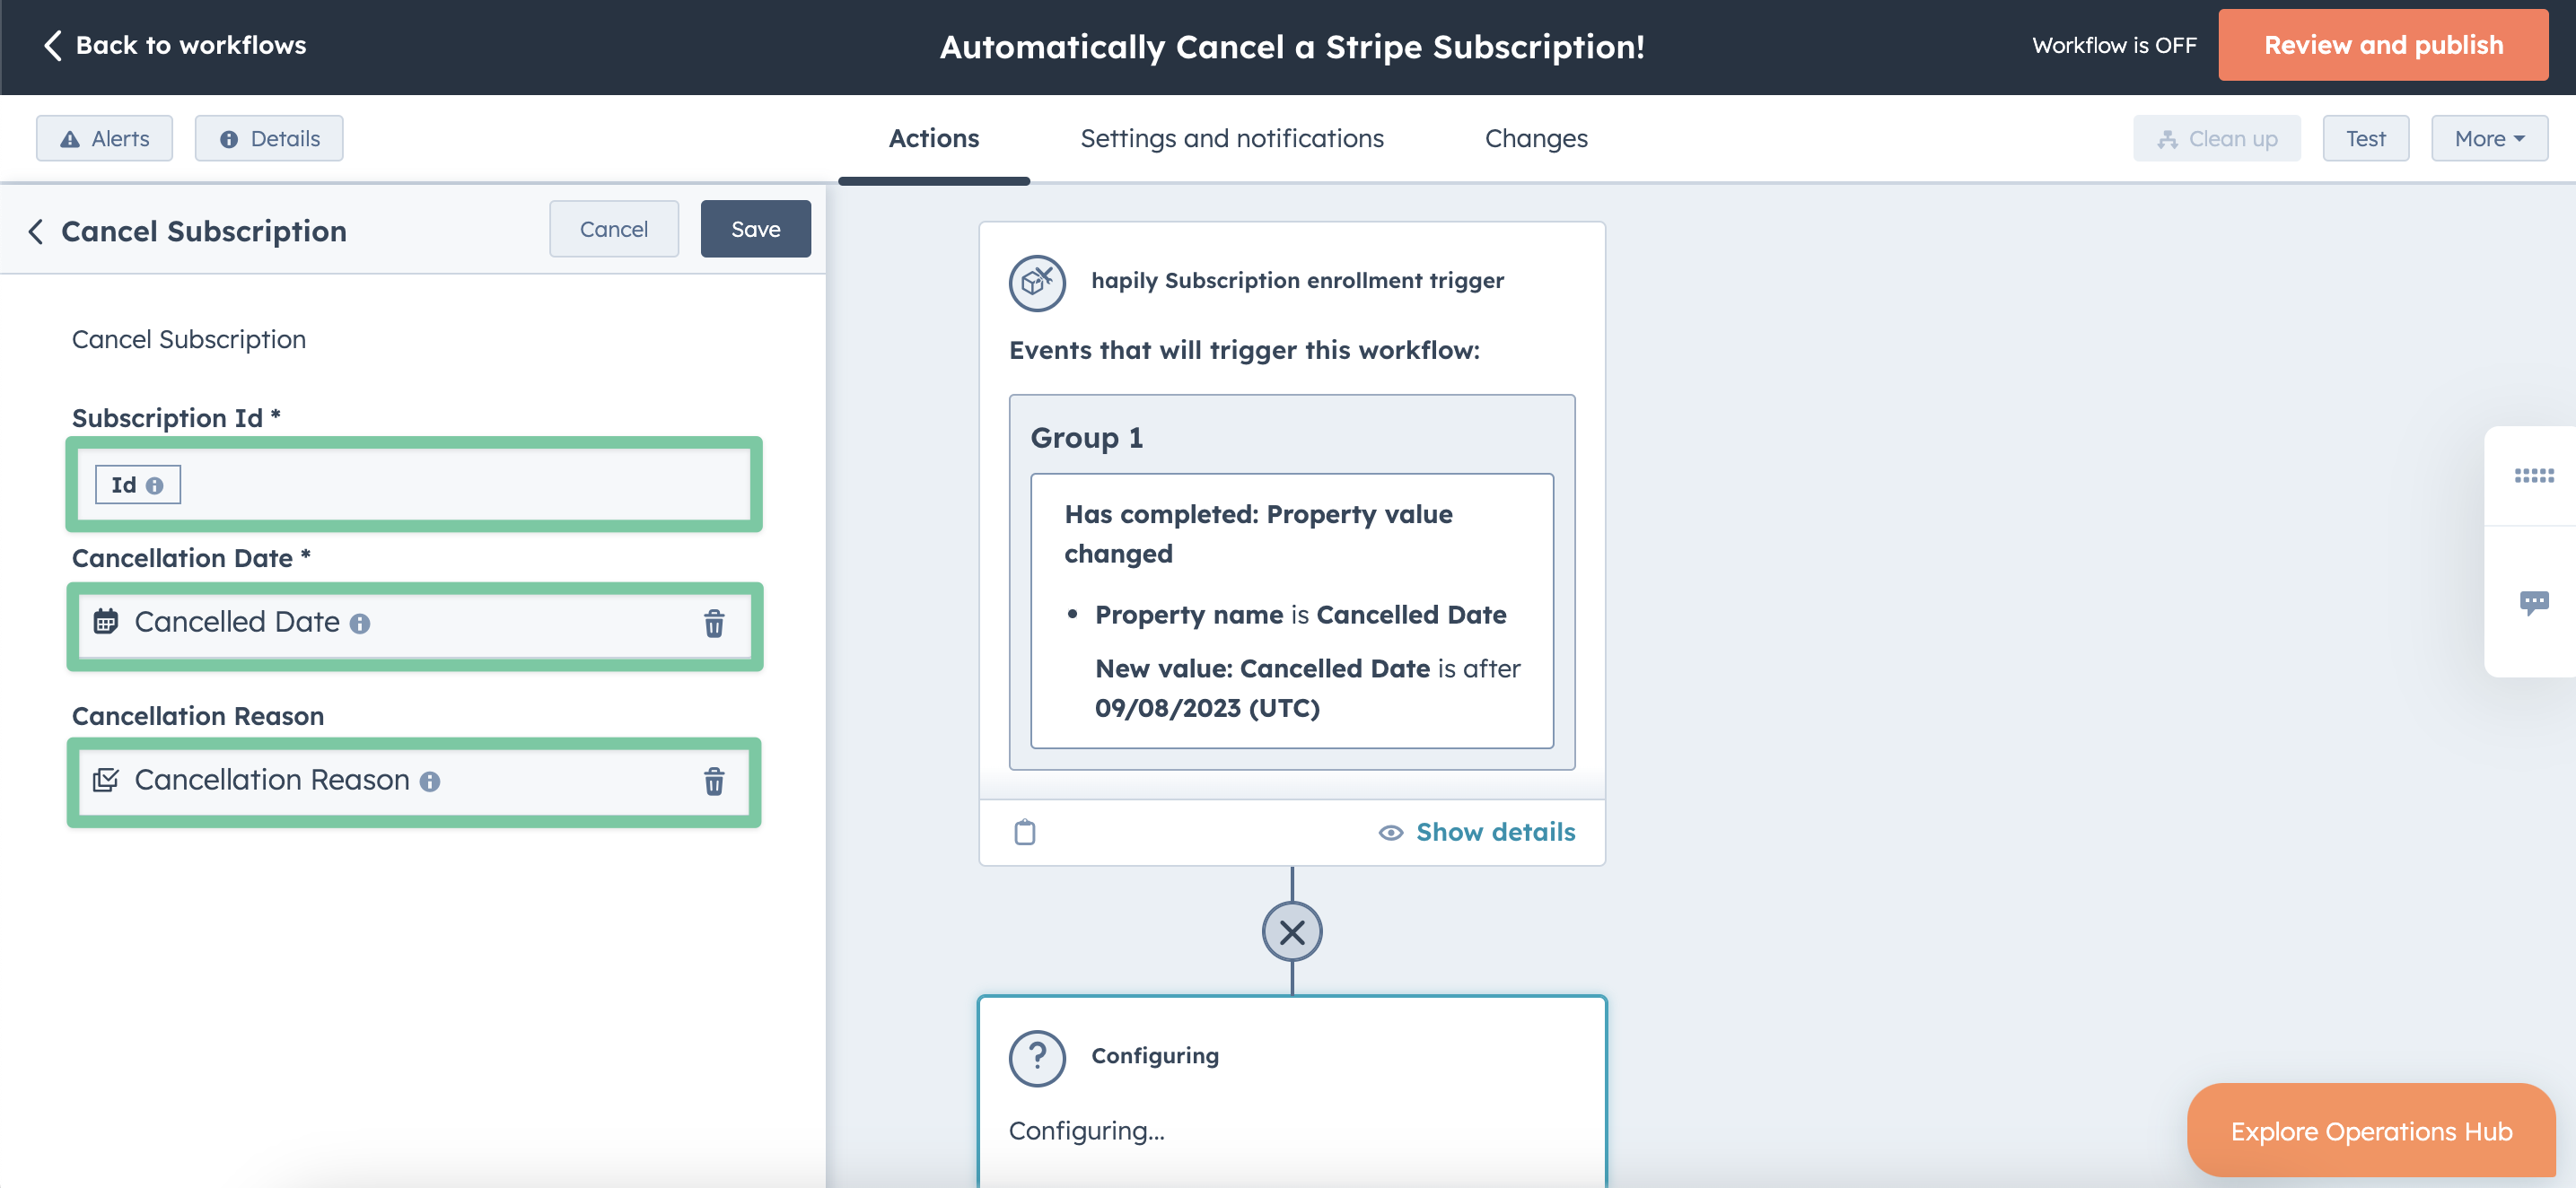 How to automatically cancel a Stripe subscription in HubSpot